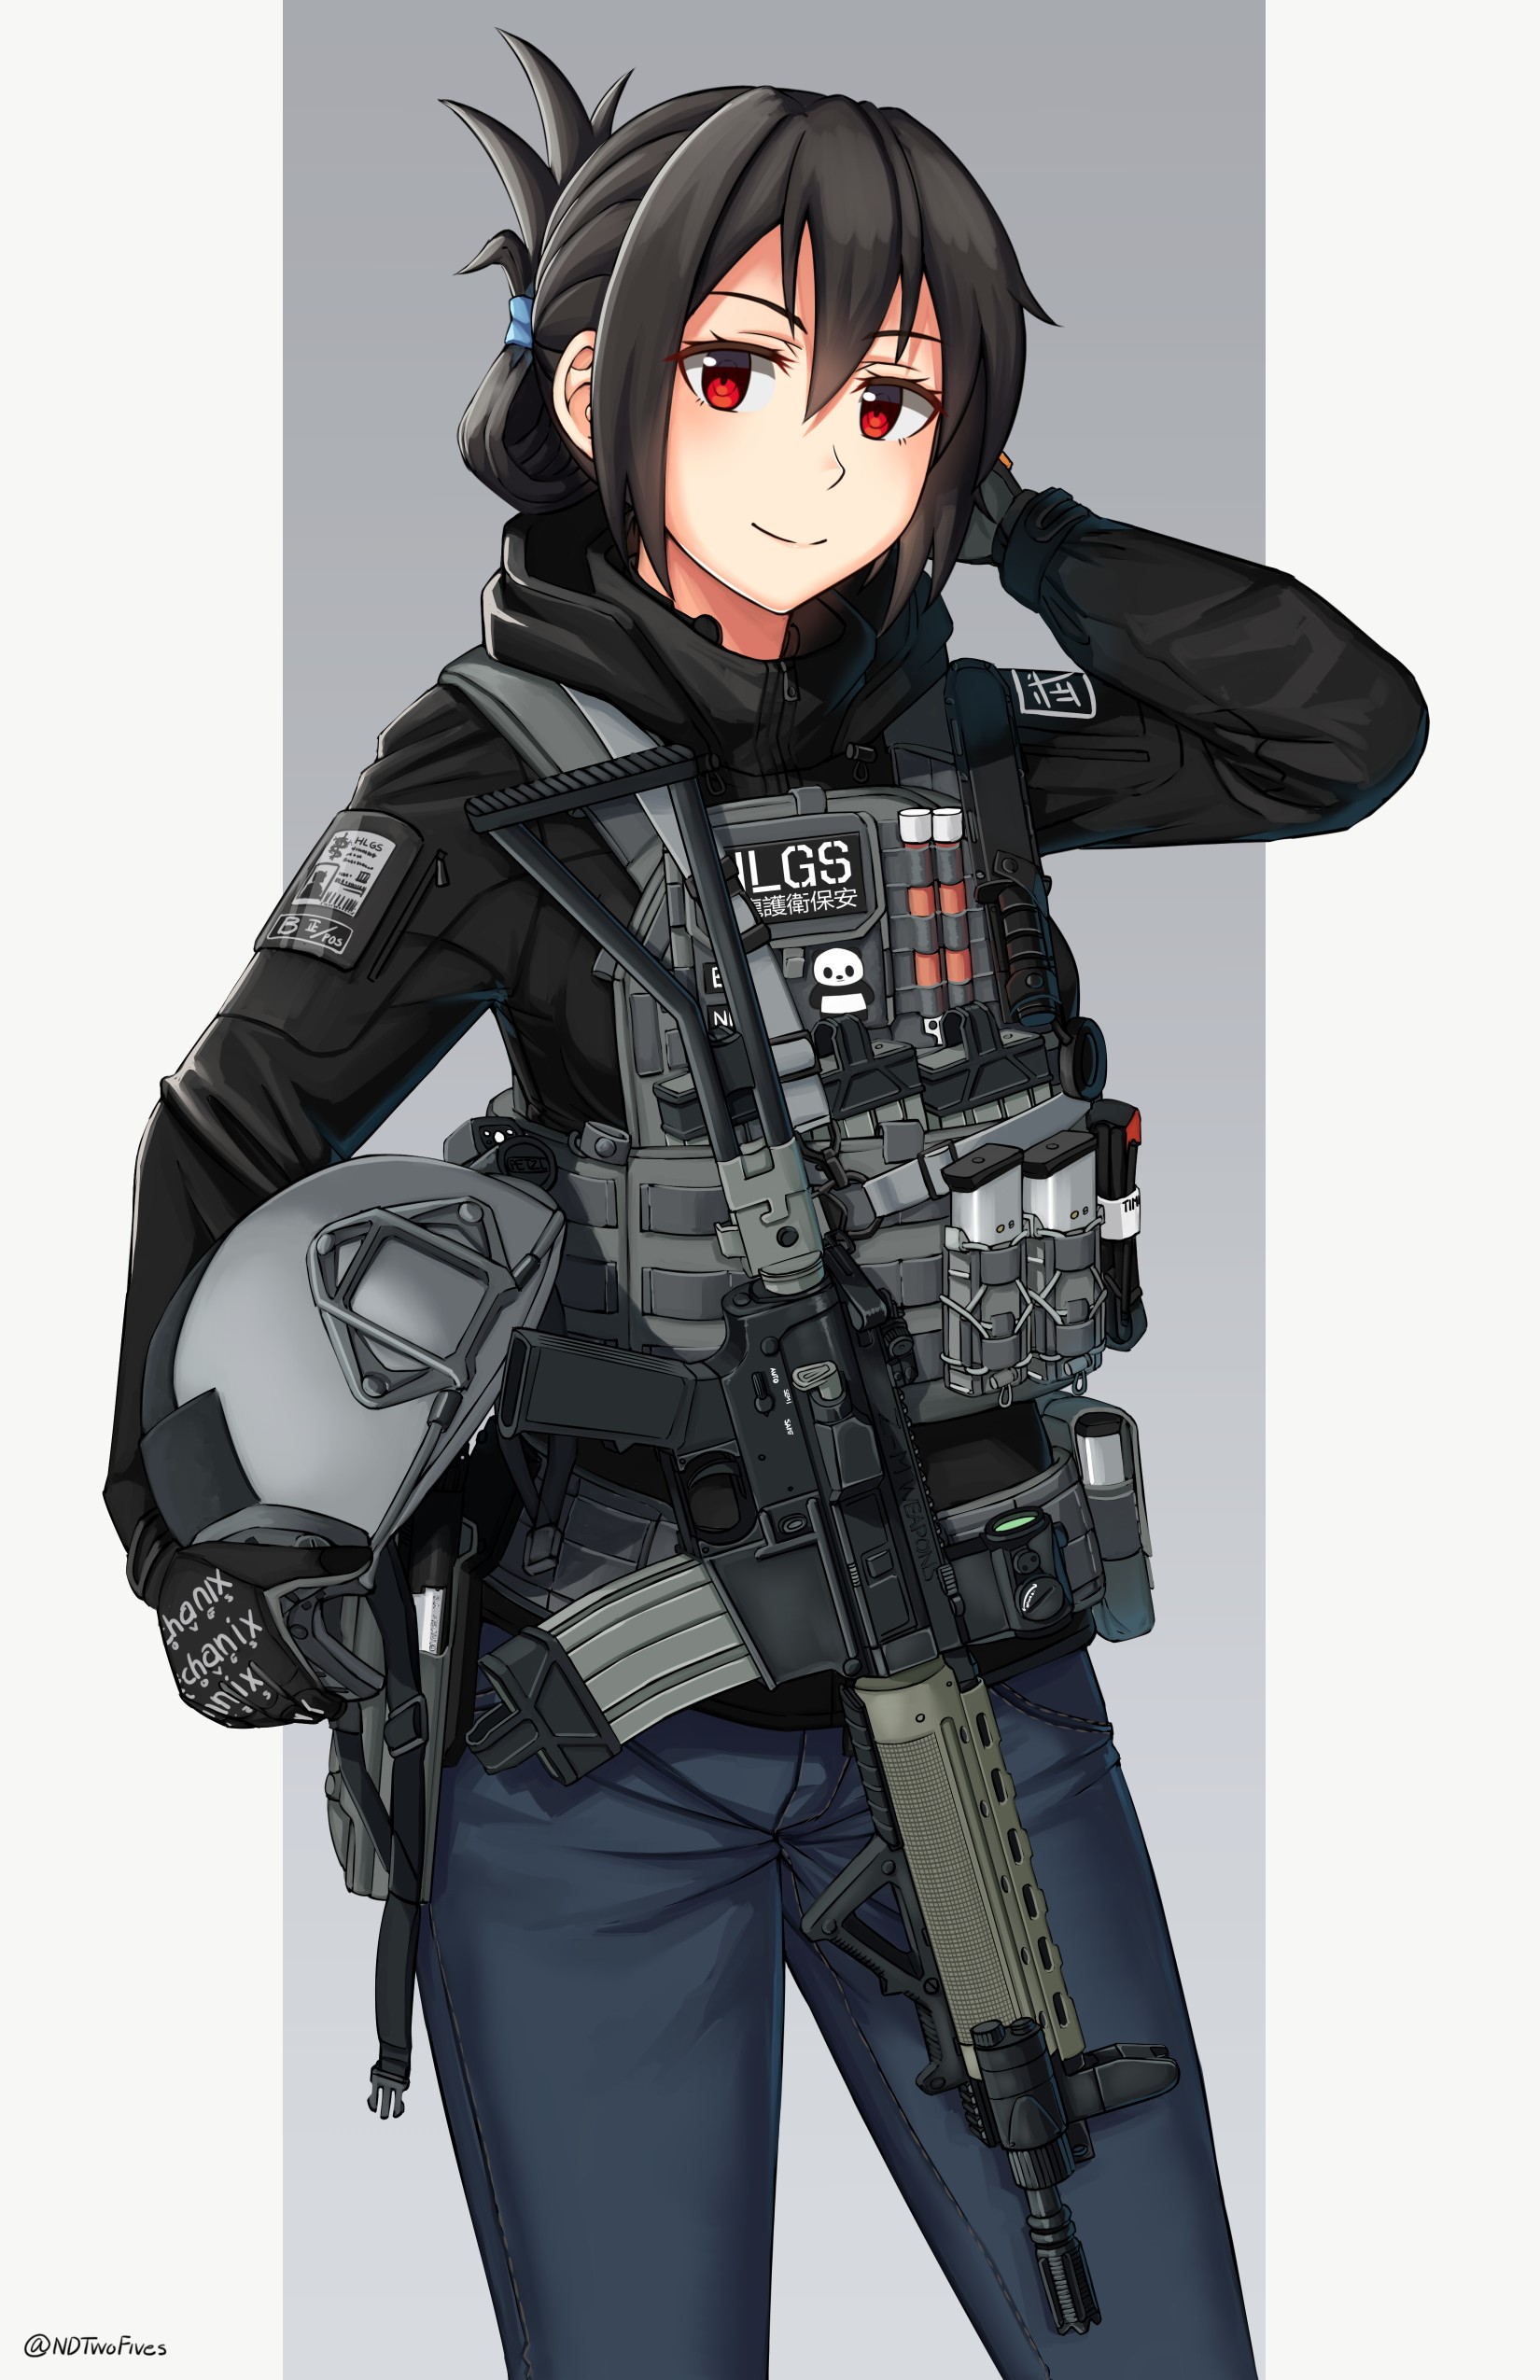 anime key visual，A squad of female SWAT officers prepared to attack,  neonlight, Cyberpunk, Futuristic, Stunning - SeaArt AI